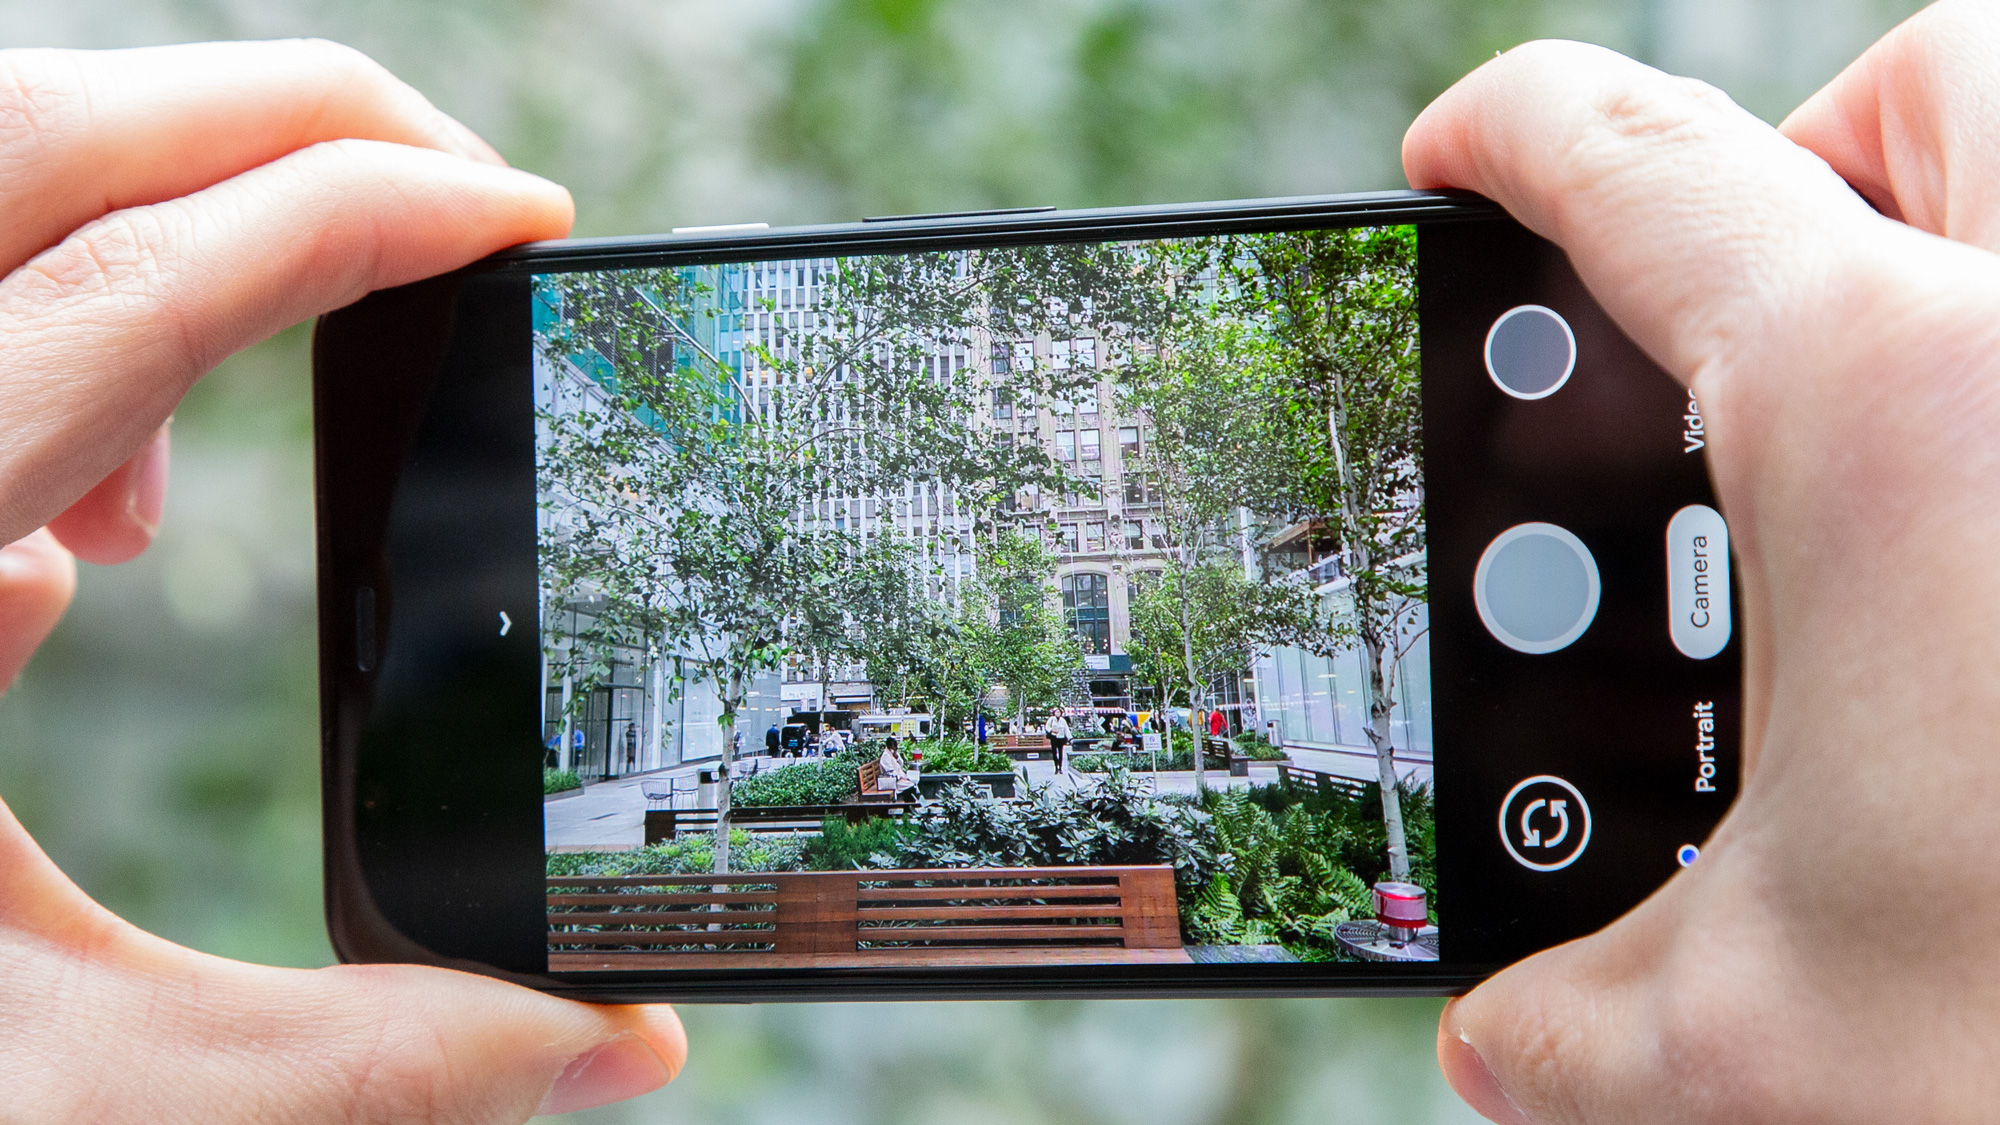 Top 5 Tips to Take Better Pictures on the Android Smartphone